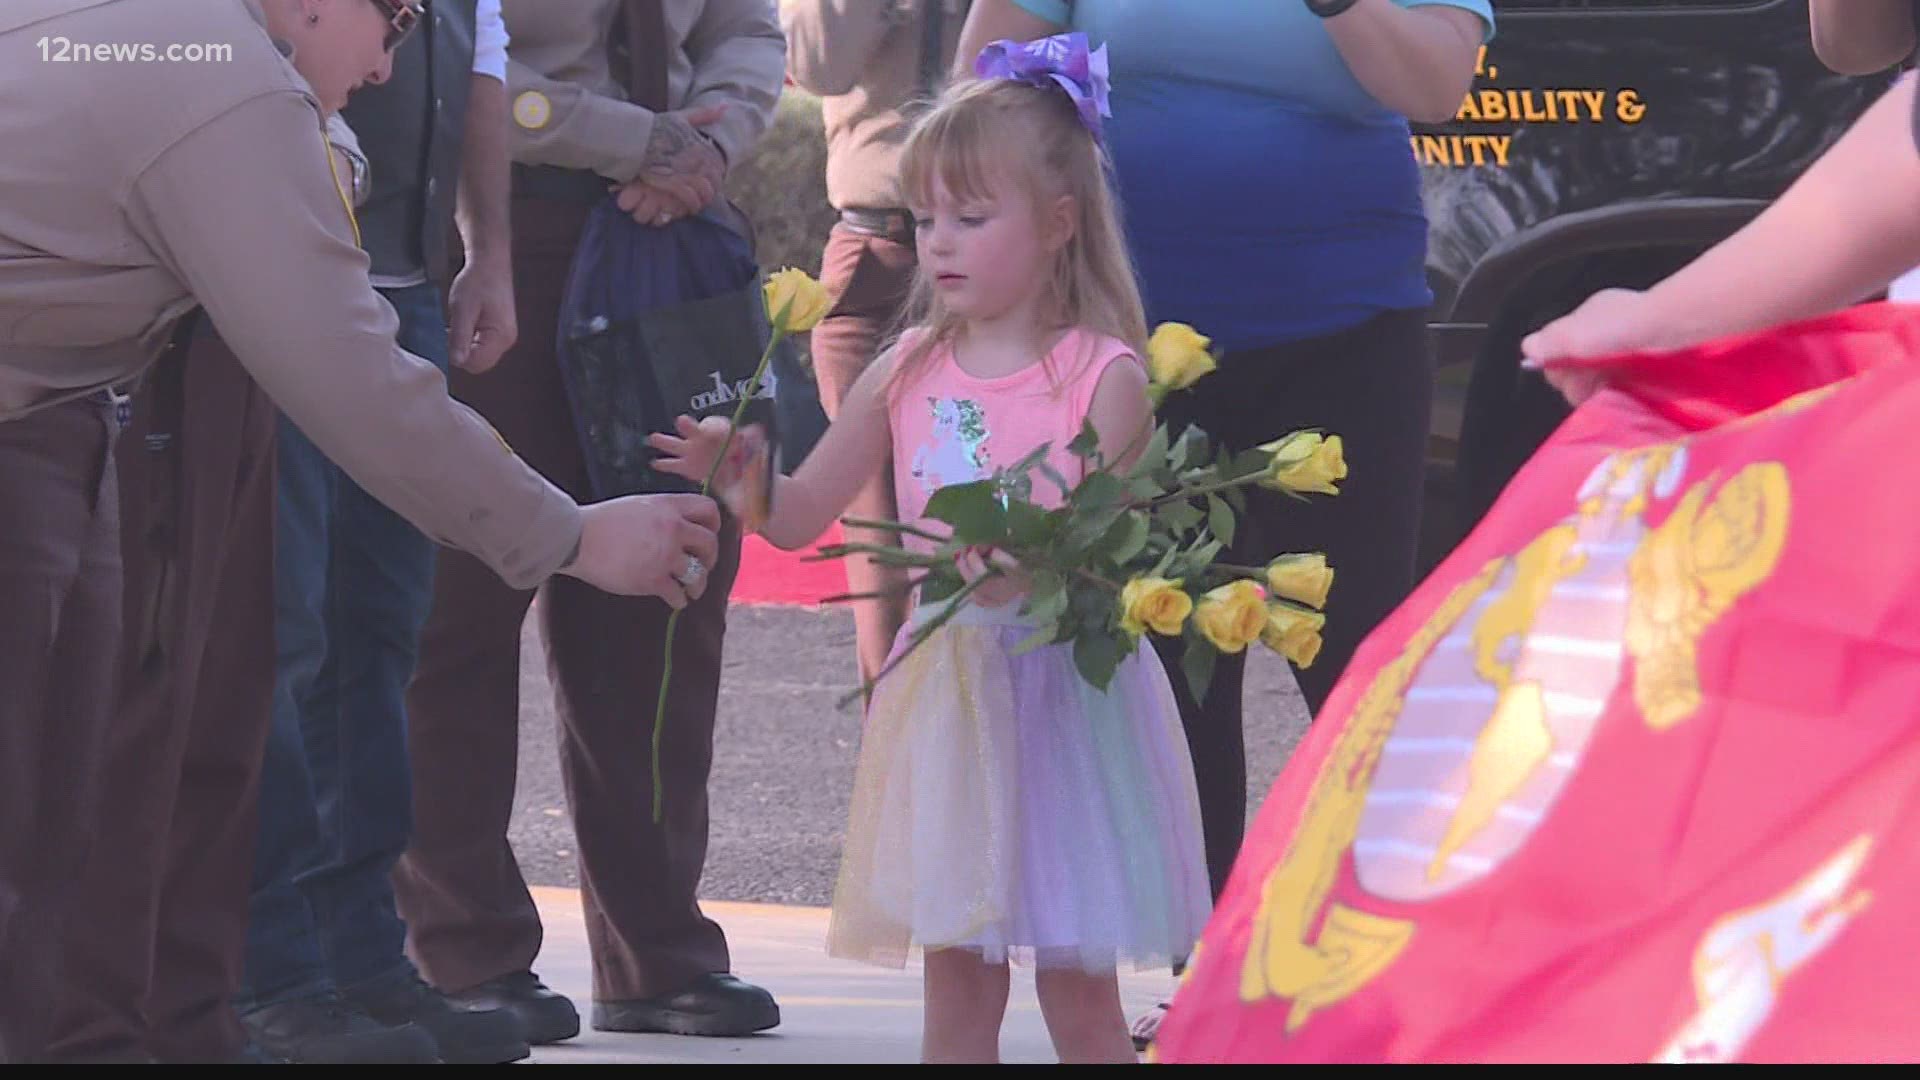 Julianna arrived at school on her first day of kindergarten at Conley Elementary School in style. Her favorite part of the day was the escort she received to school.